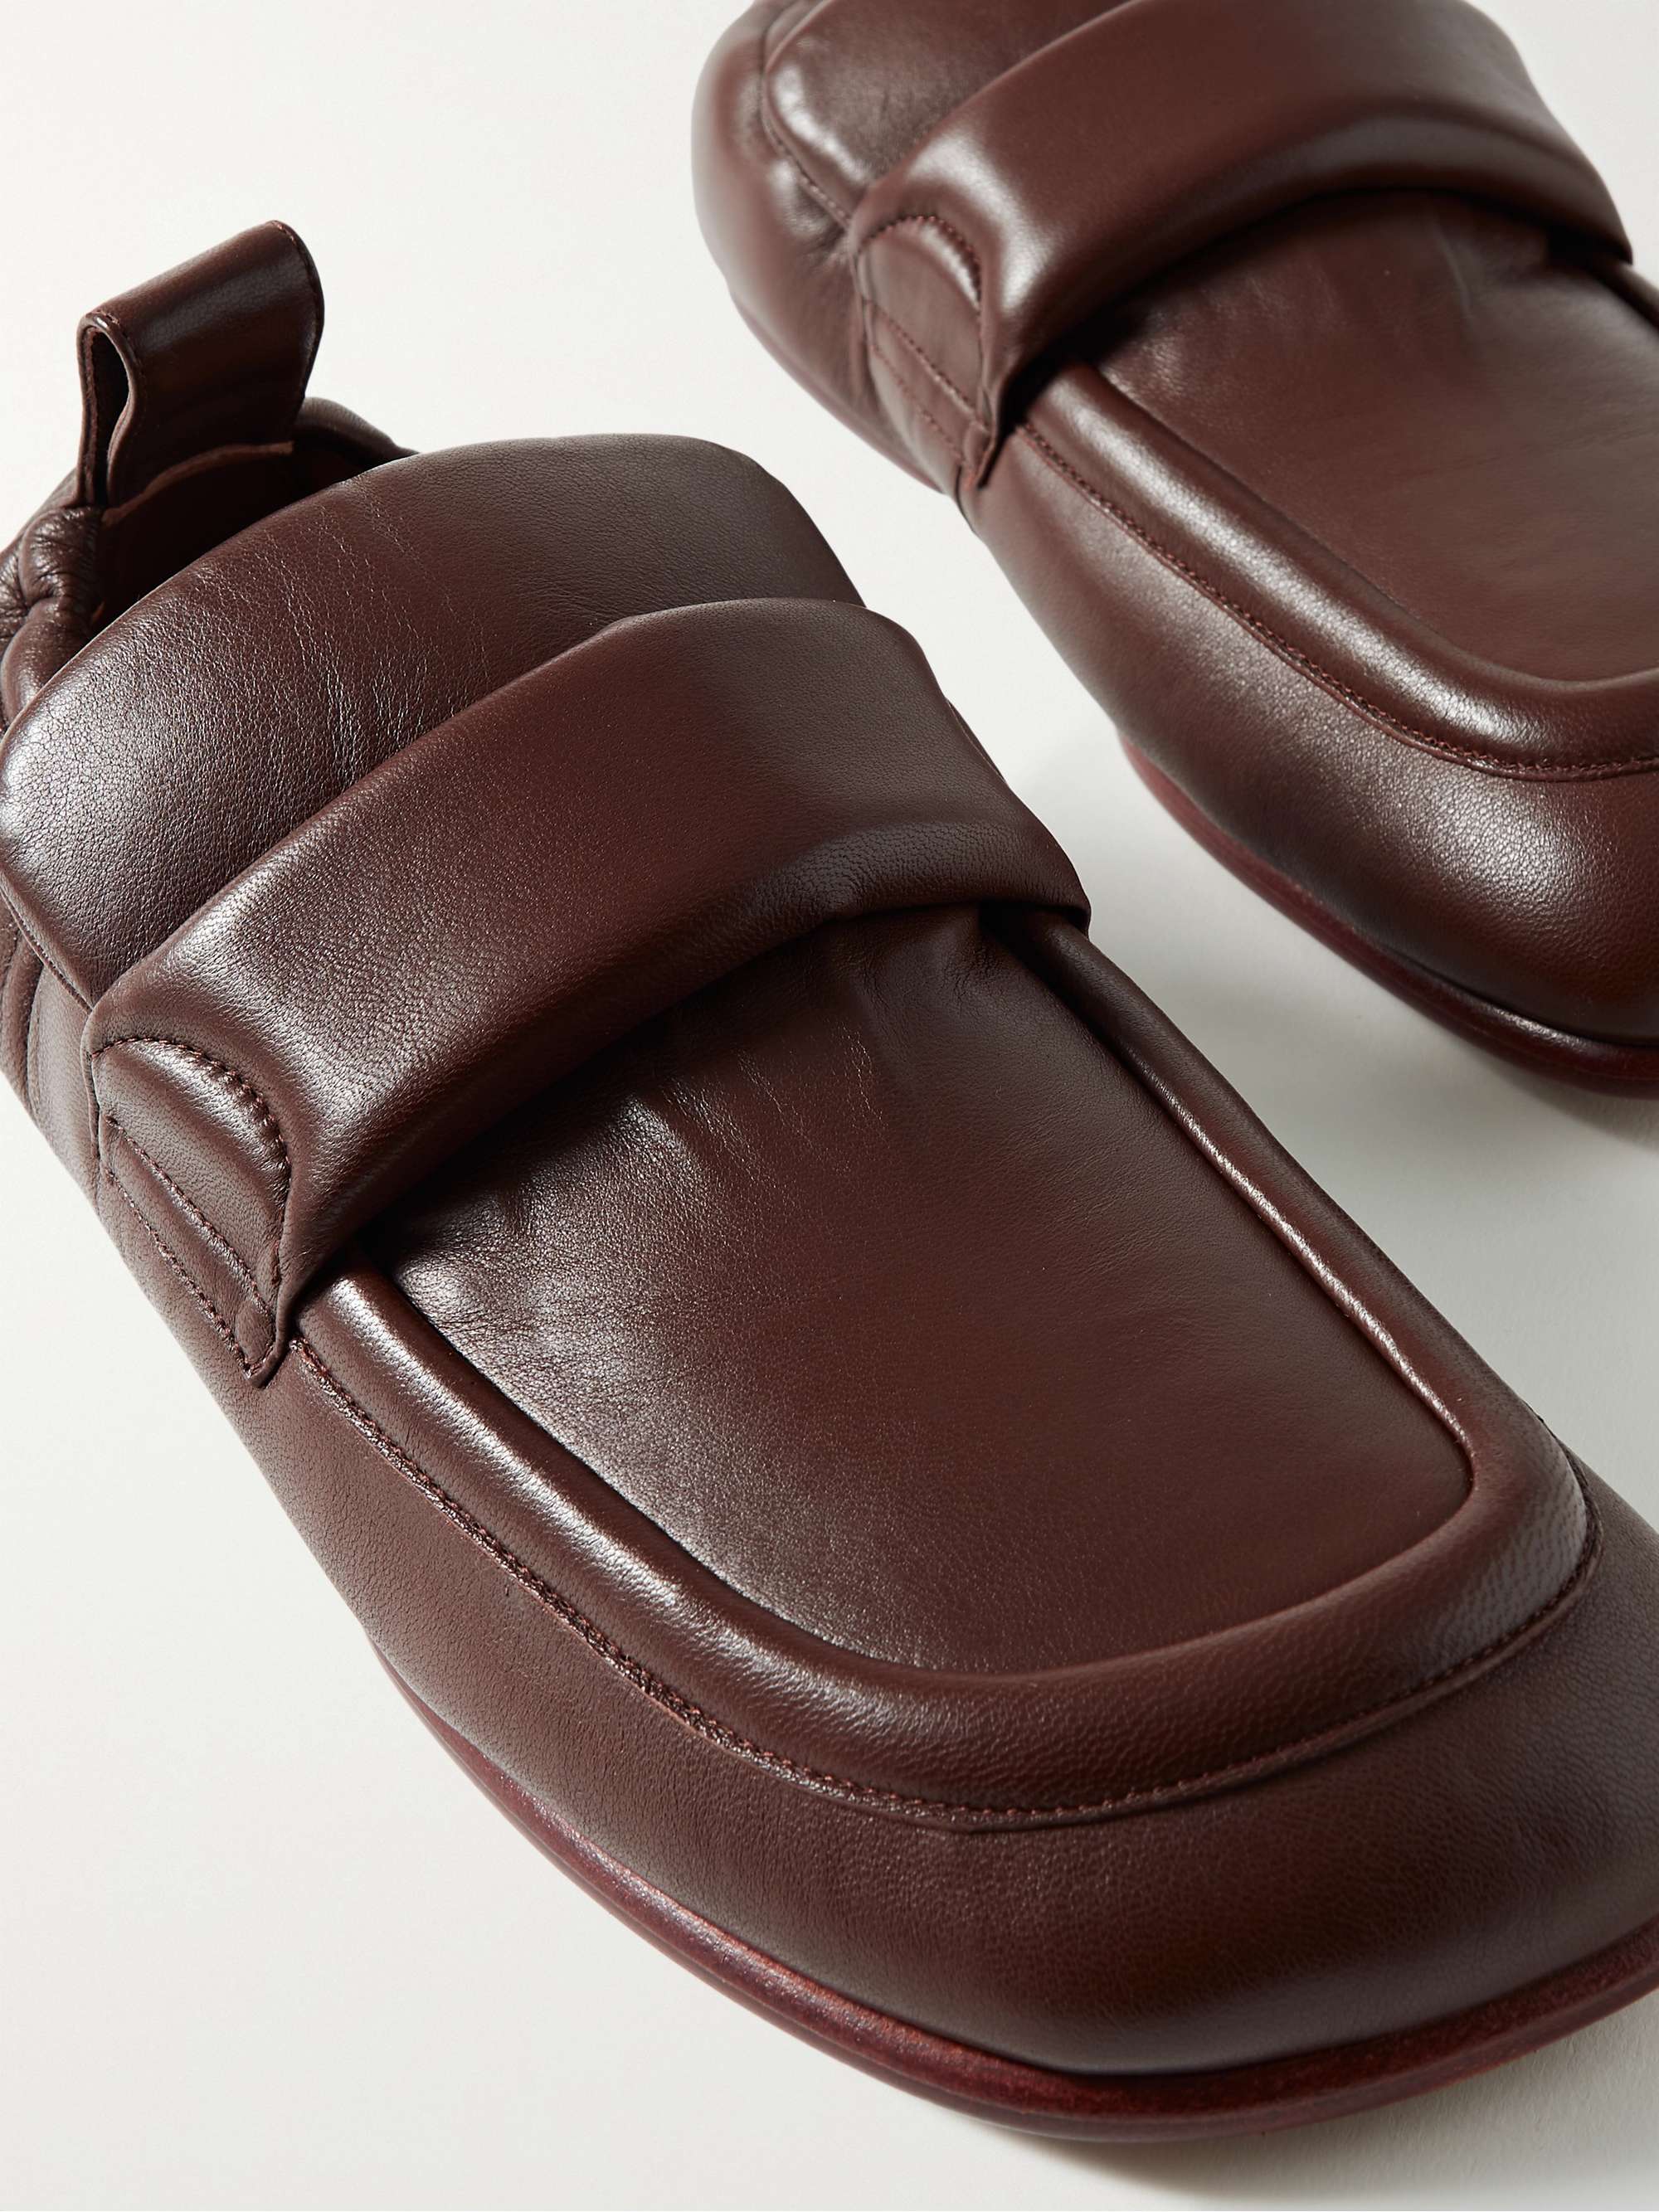 DRIES VAN NOTEN Padded Leather Loafers